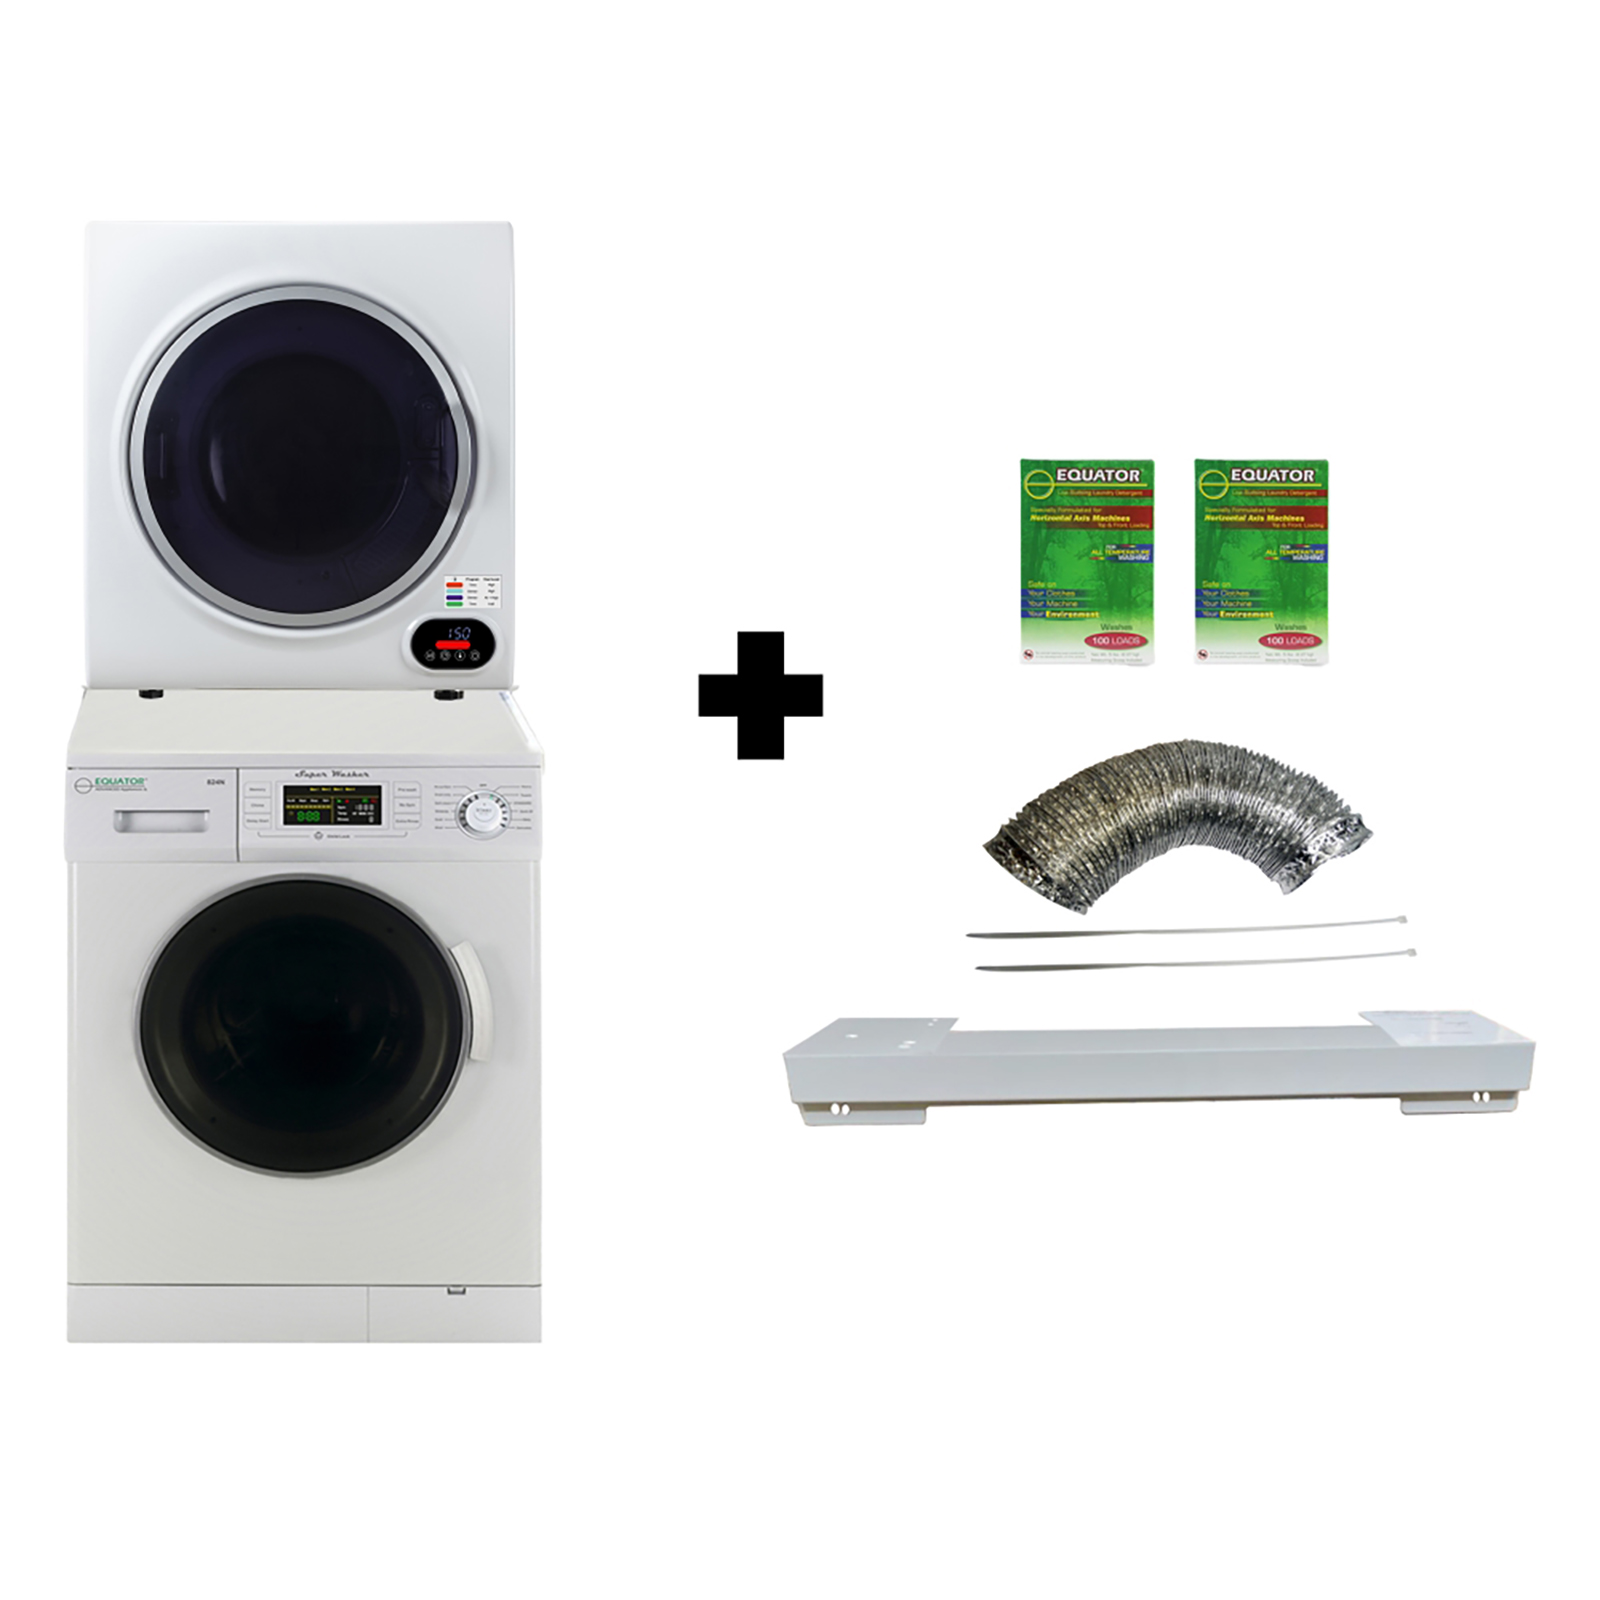 Equator 824N852RSK3070IVK10552Boxes HE  18lbs White Super Washer 13lbs White Compact Dryer - Stackable Set